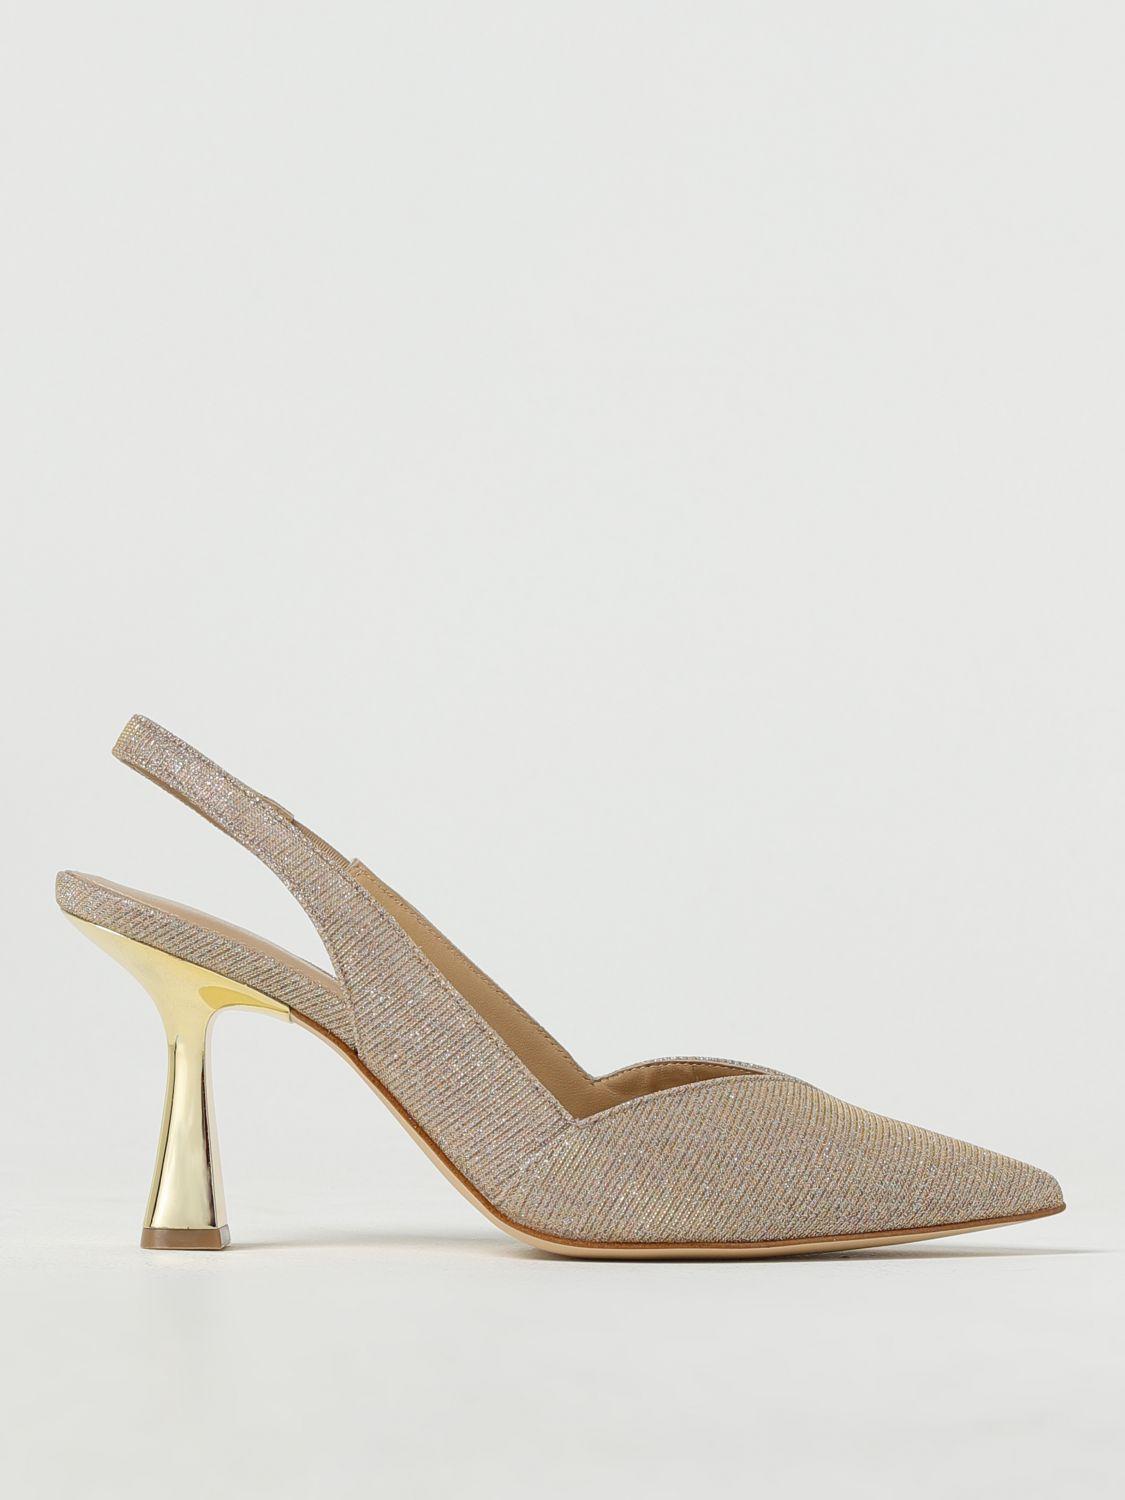 Michael Kors High Heel Shoes in Natural | Lyst